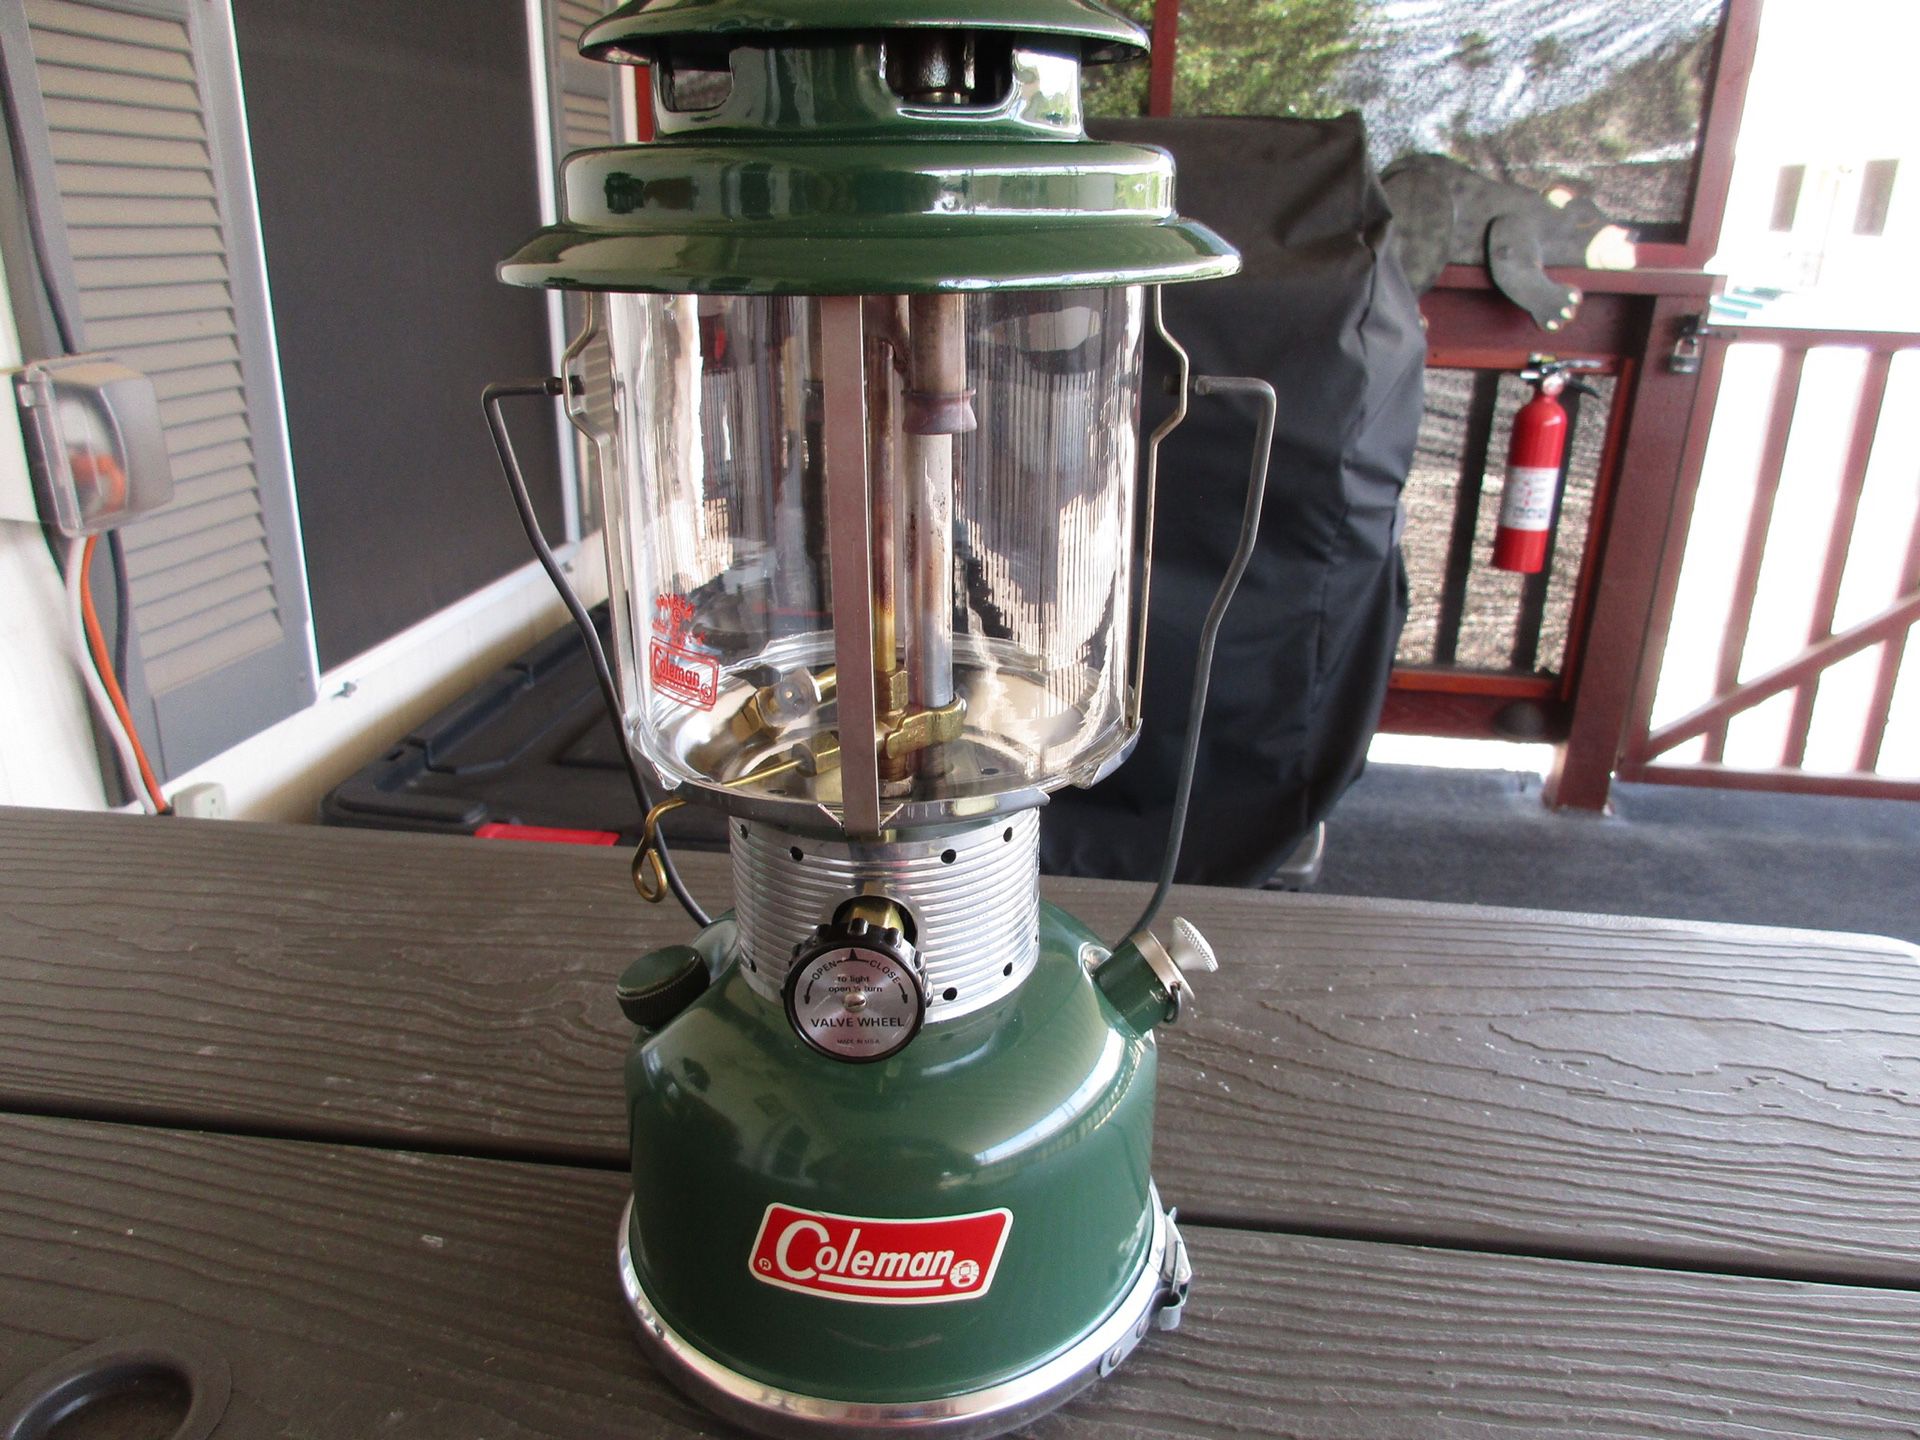 Hanging Coleman Model 5310 4D Battery Operated Camping Lantern for Sale in  Philadelphia, PA - OfferUp